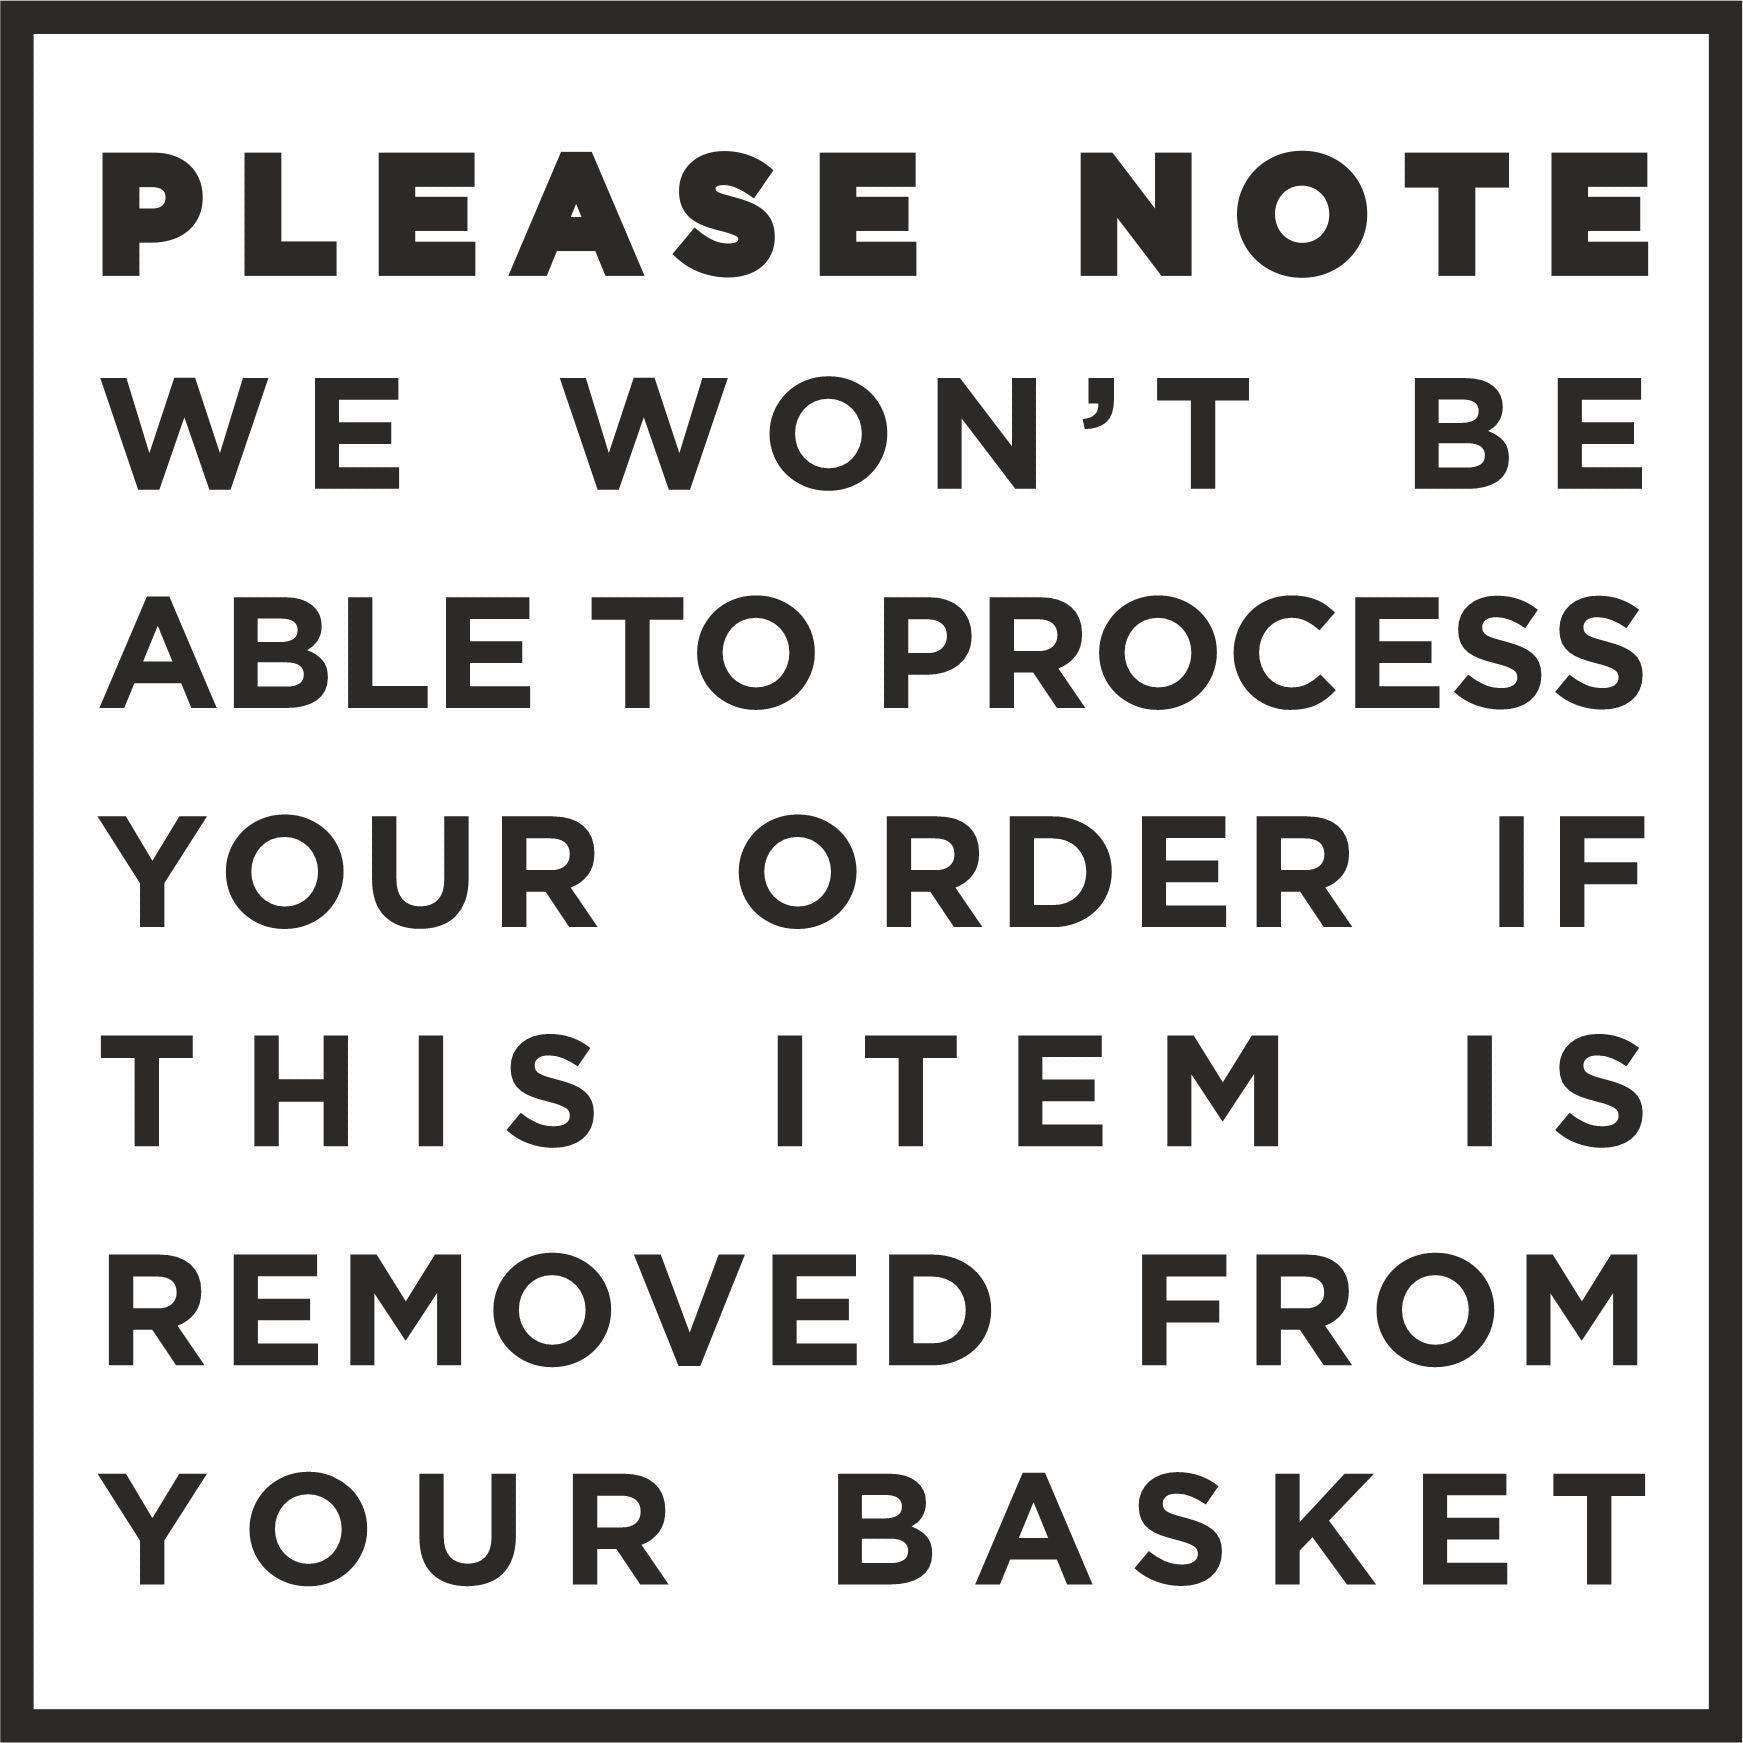 '+8 Custom Script Labels (Add on - 16 Total) DO NOT REMOVE FROM BASKET Home Organisation